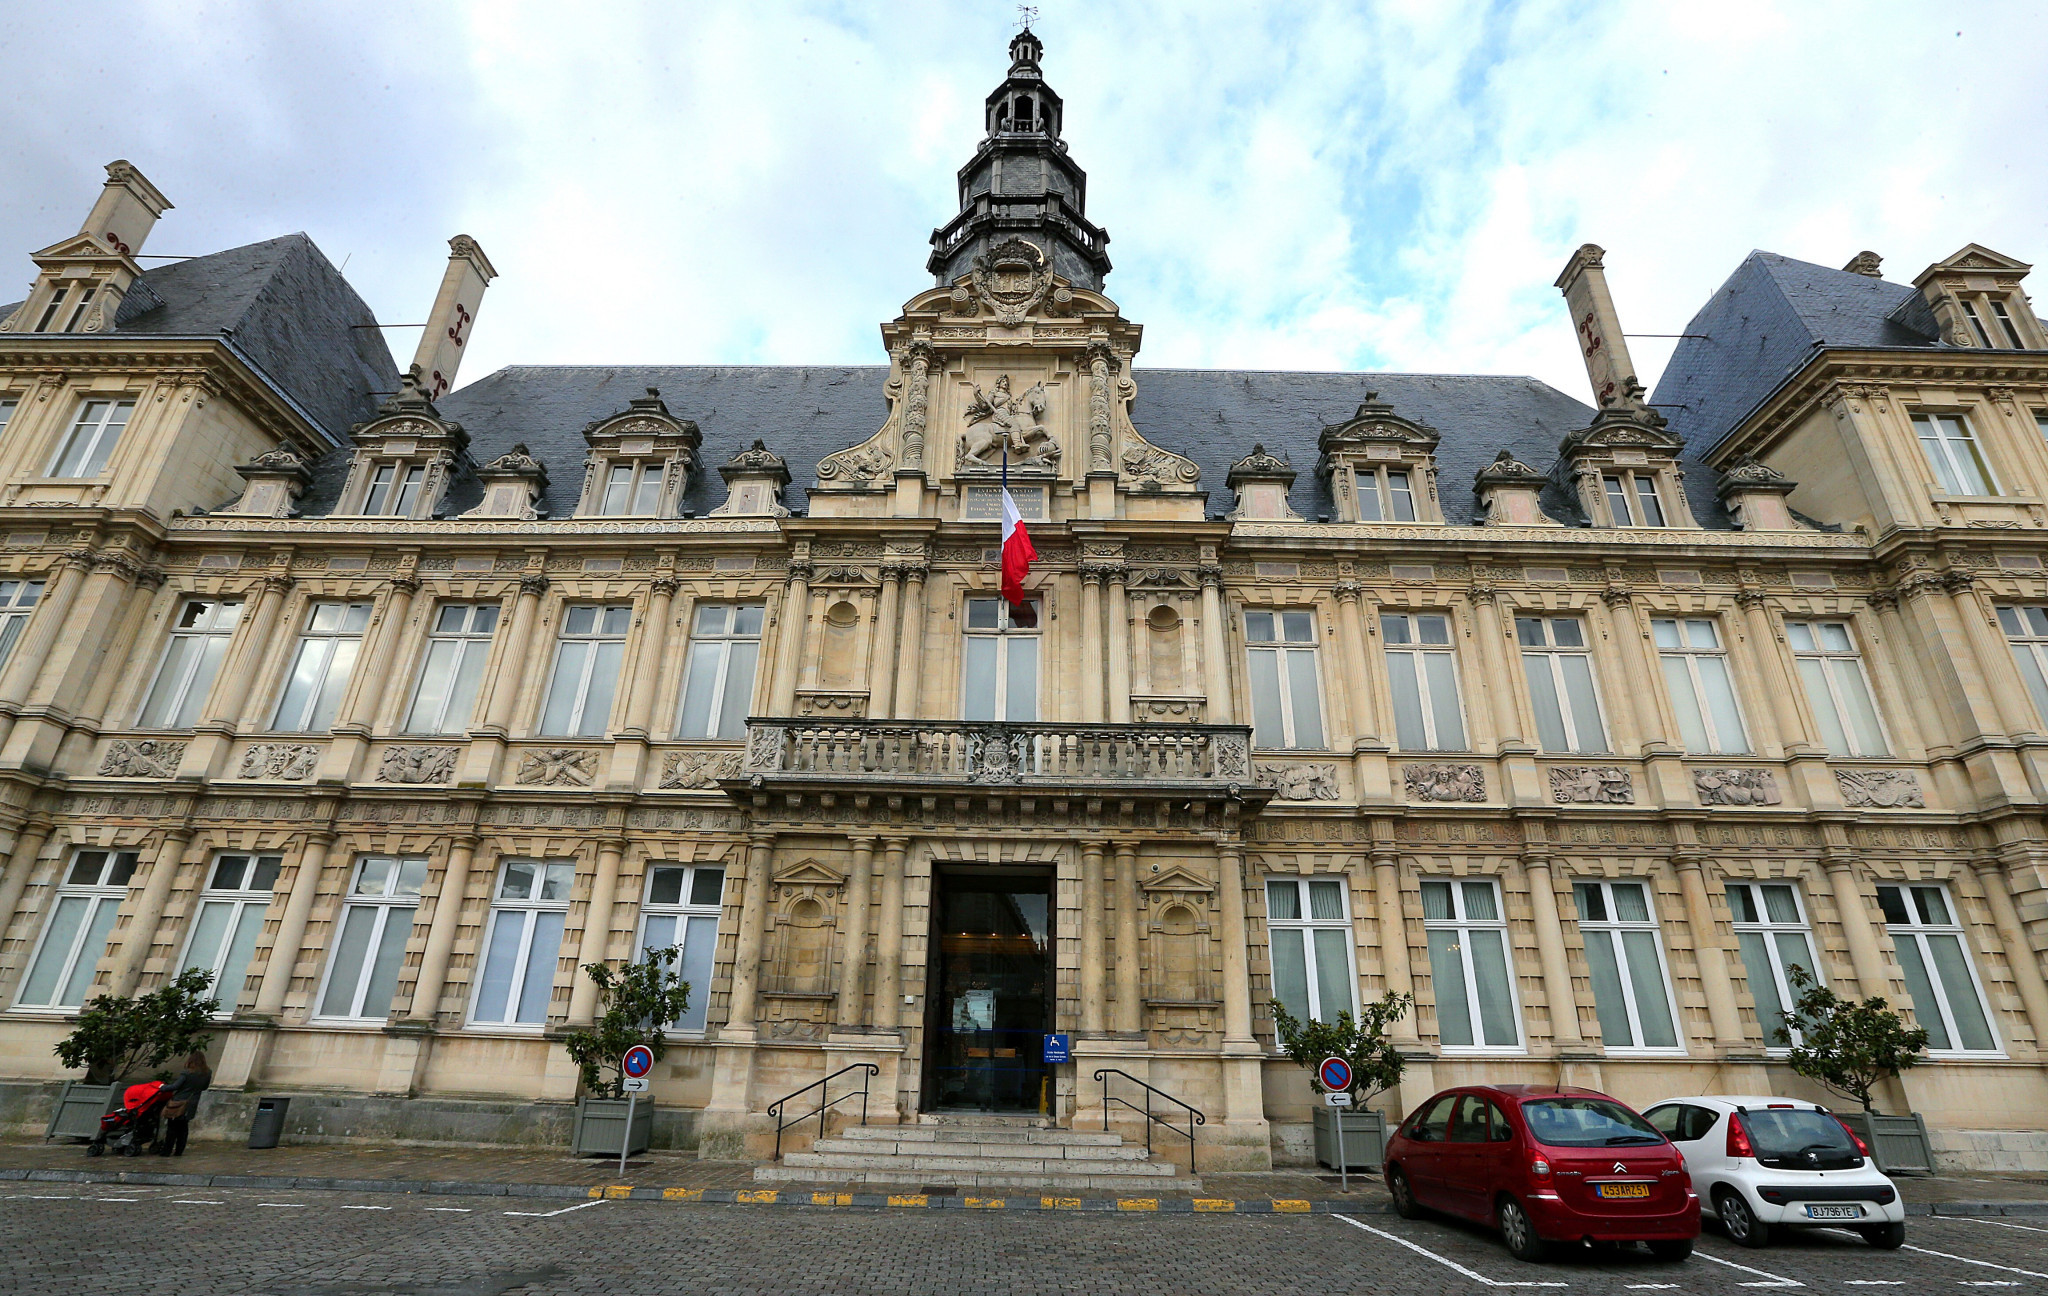 The British Olympic Association's agreement to have Reims as a training base prior to Paris 20204 was finalised at the City Hall ©Getty Images